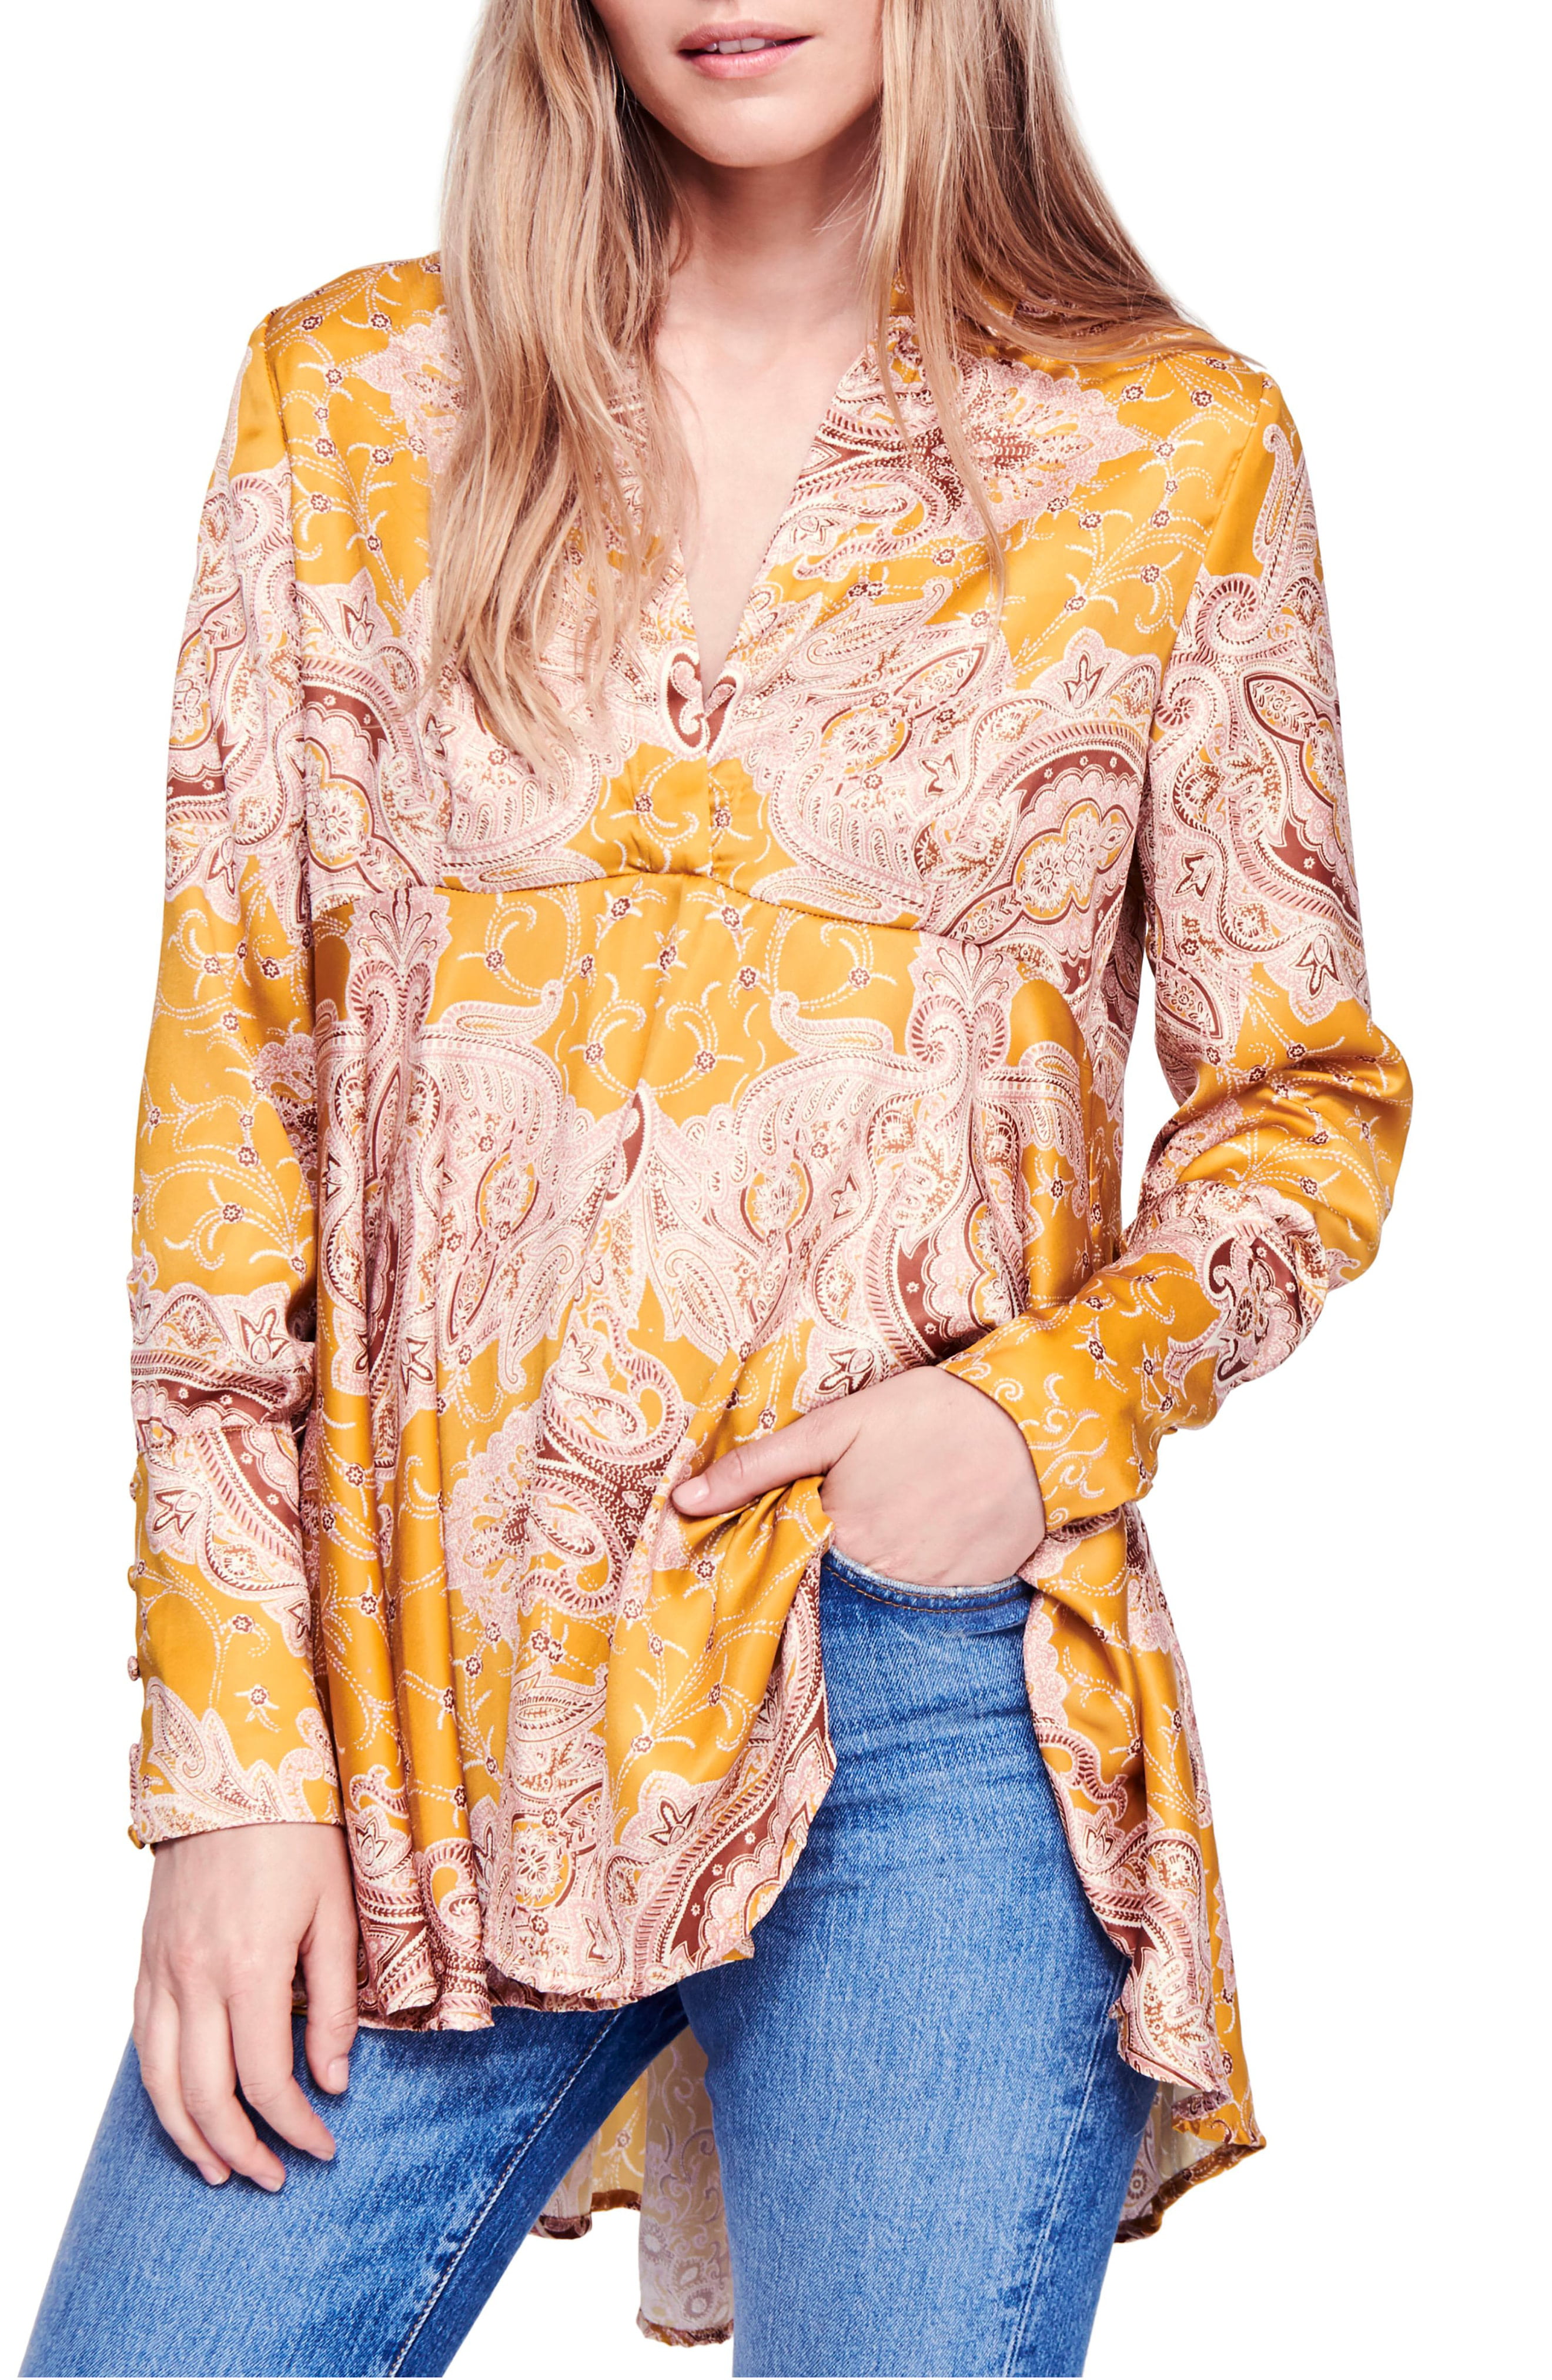 Details about   Free People Macra Maze Me Top S Women's Casual Printed Fringes Blouse NEW 8364